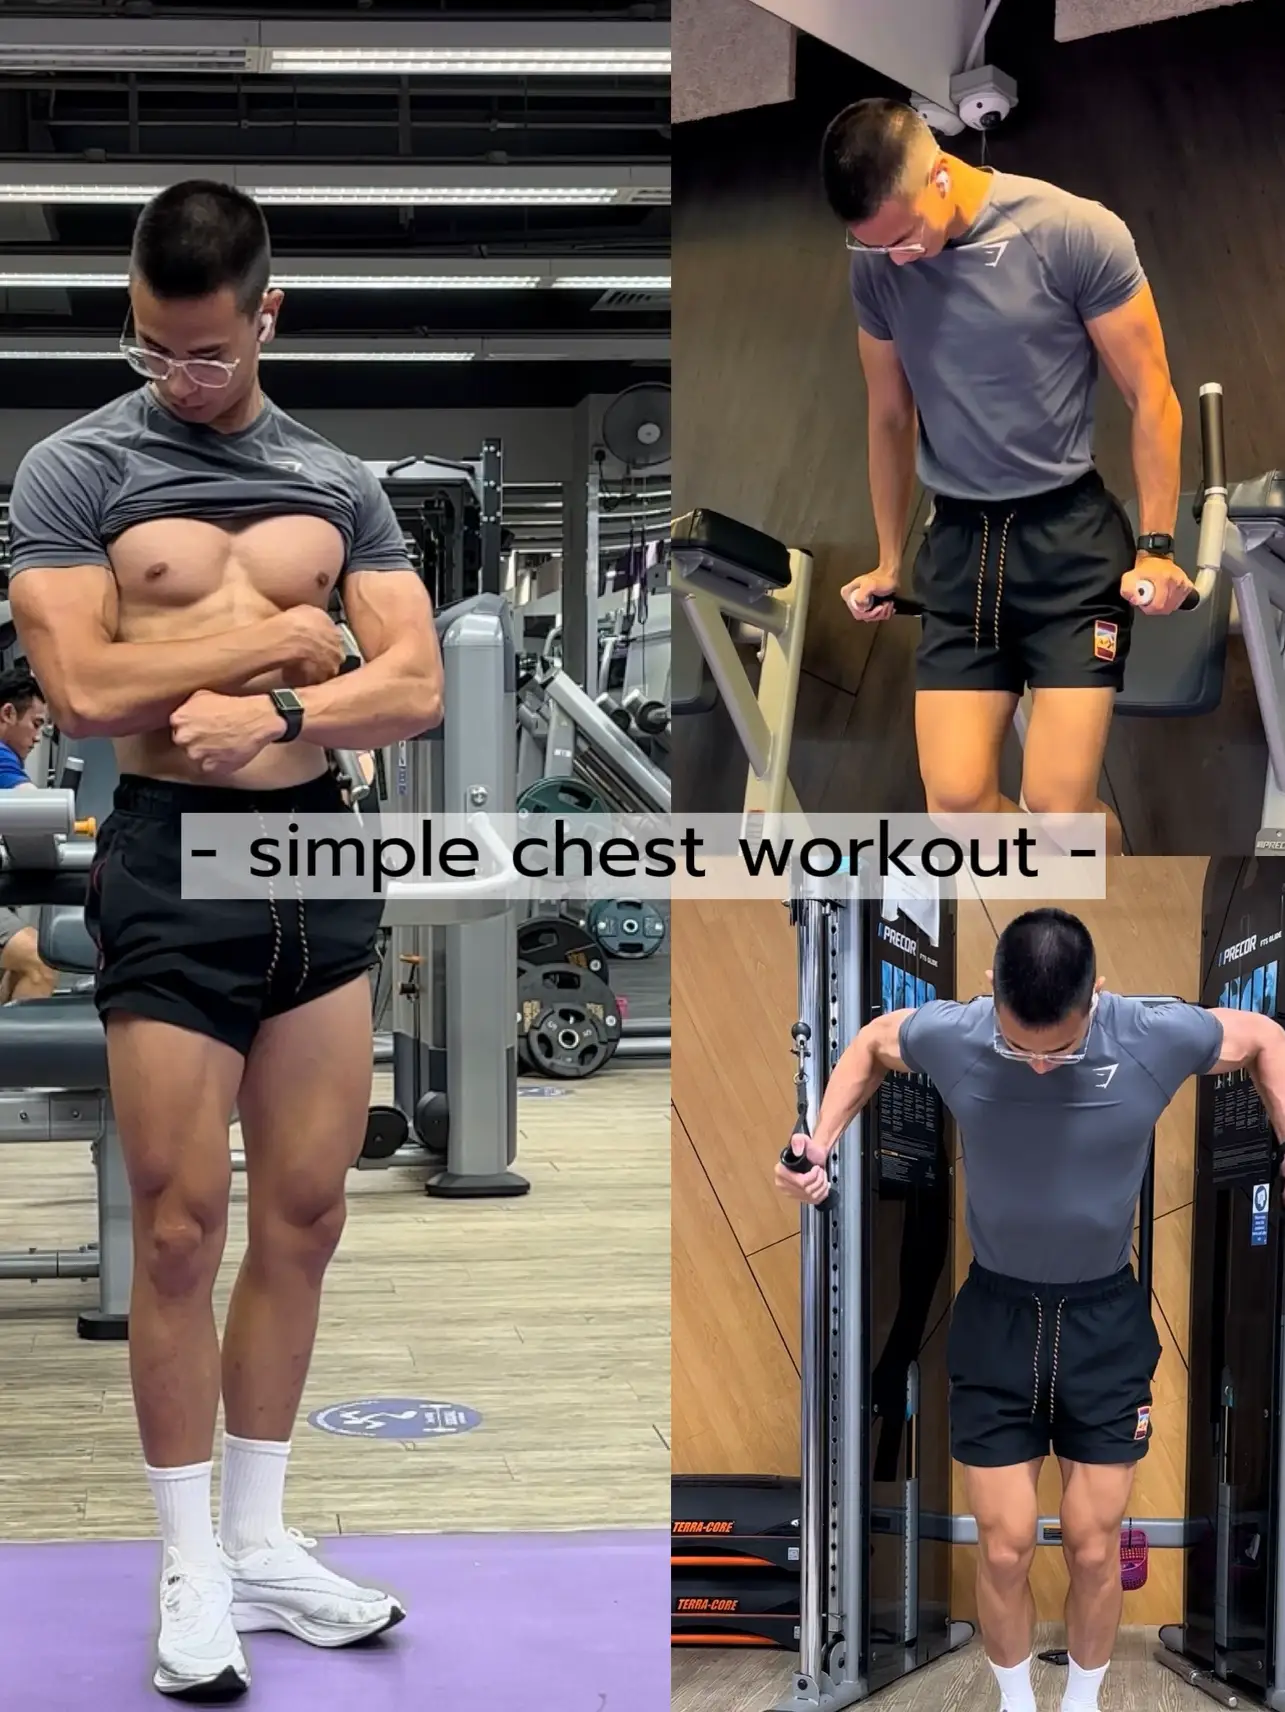 Easy chest workout for beginners :)